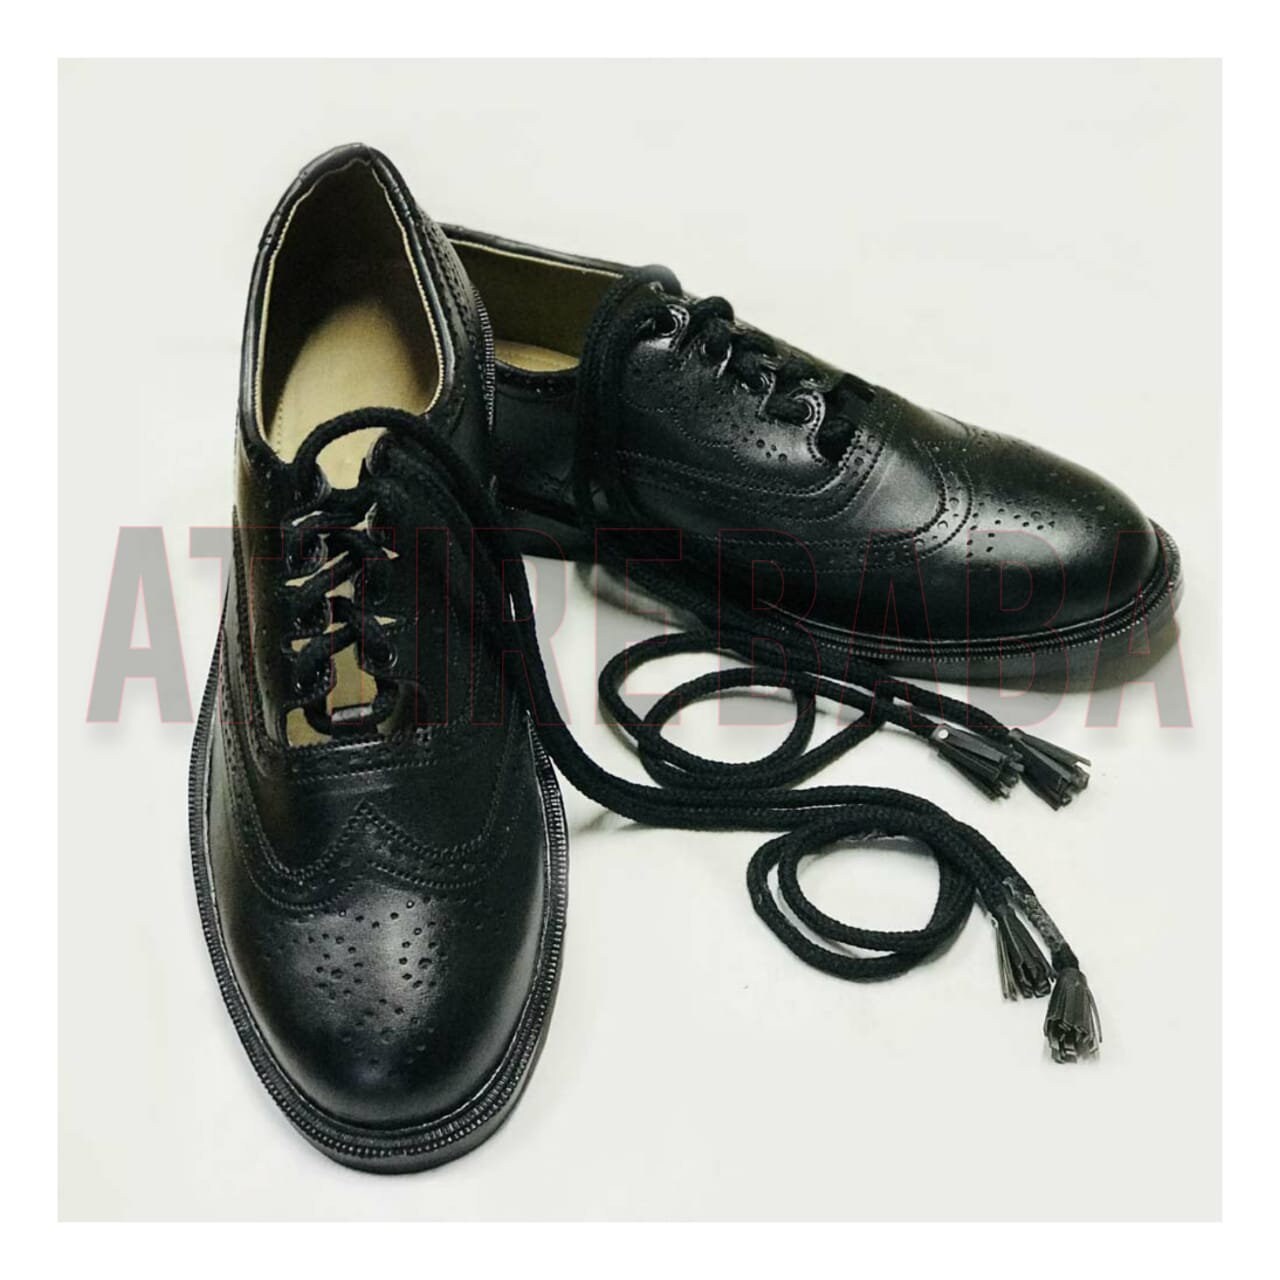 Shoes Insoles & Accessories Shoelaces Scottish Ghillie Brogues Shoes Laces with Leather Tassels Kilt Shoe Replacements 